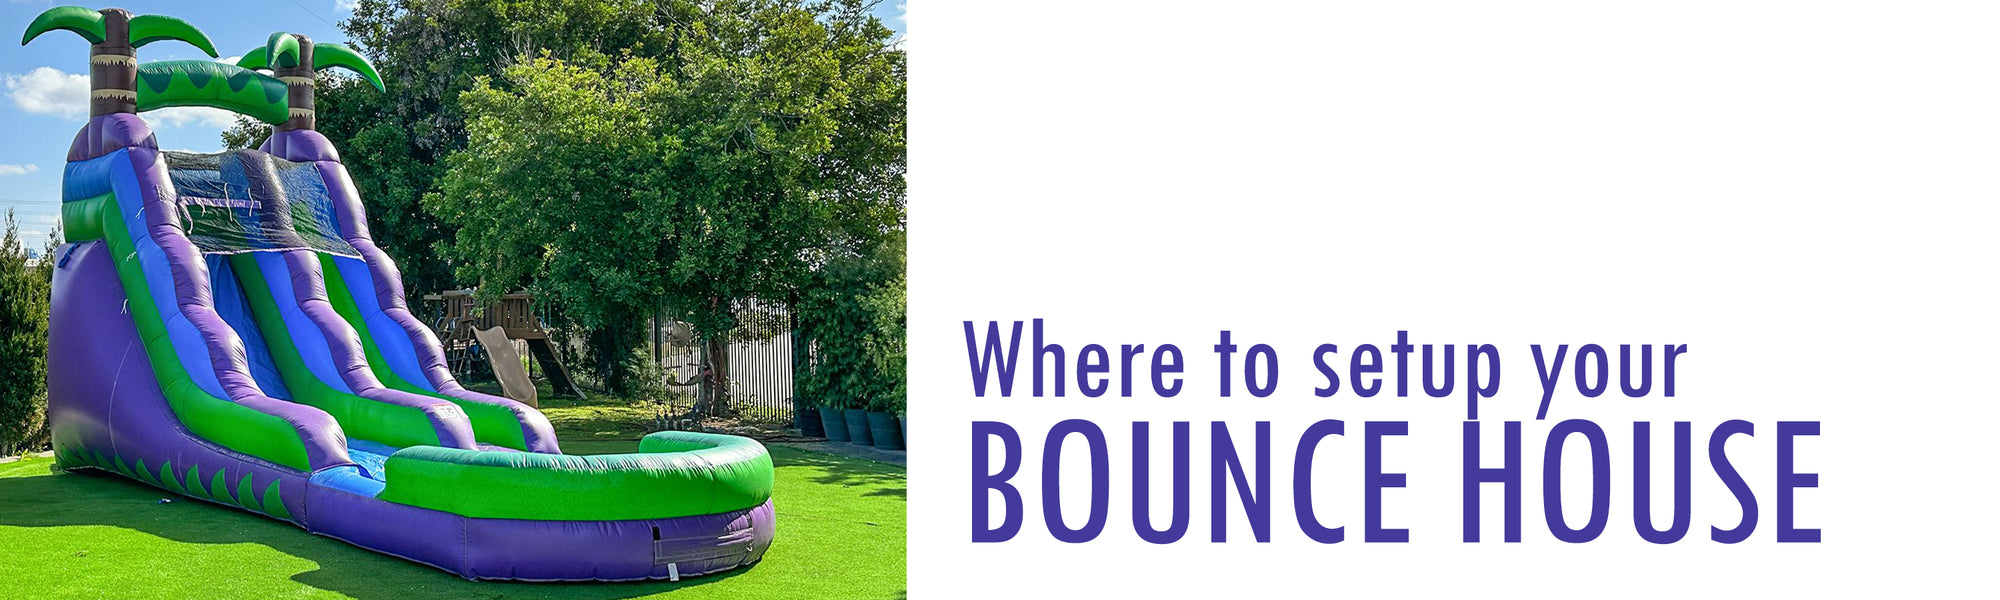 Where to set up your bounce house!